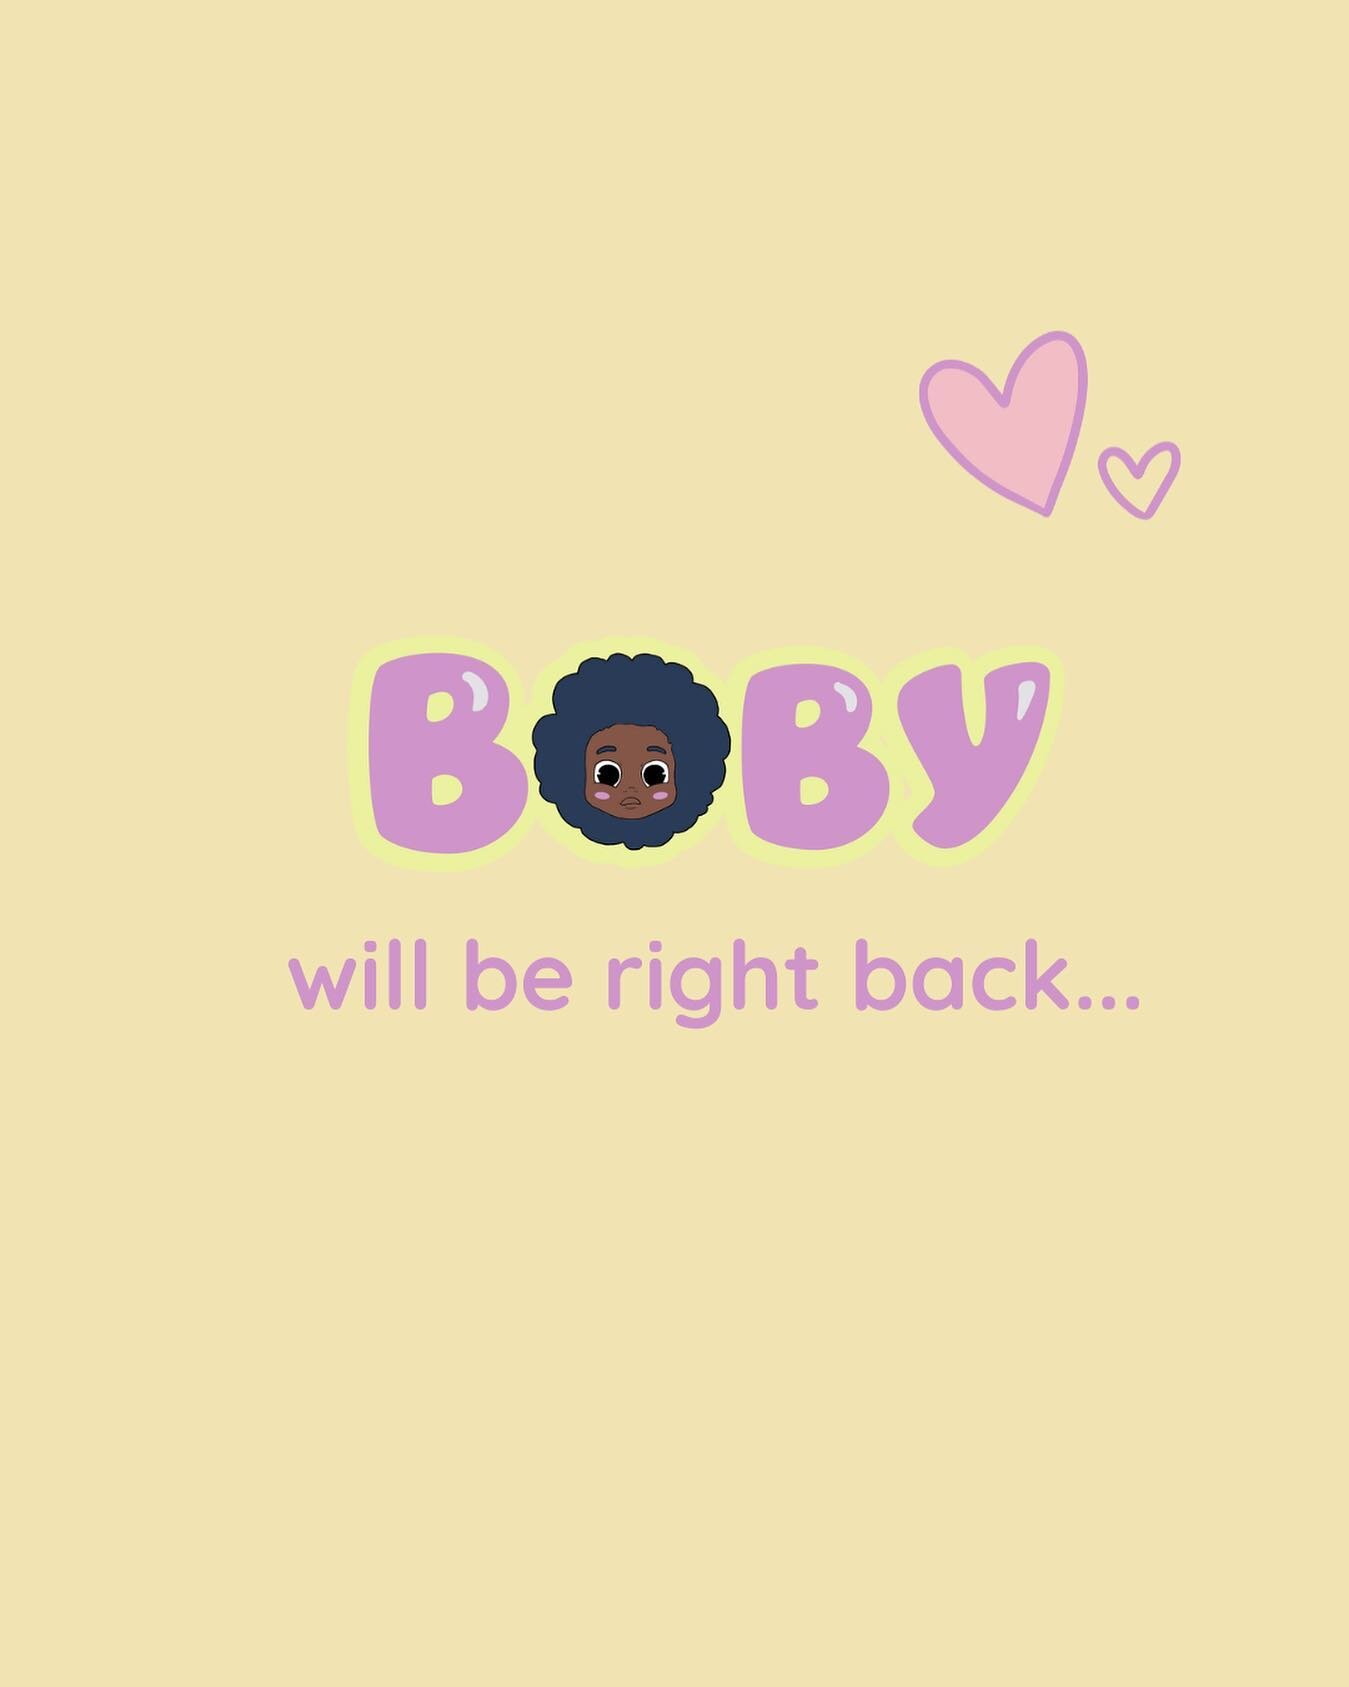 Hey BOBY Fam! Hope you all are safe and well! We wanted to let you all know we are still here but we are currently occupied with a bunch of new revamps and changes. Please bare with us as we take this break for mental health, team rebuilding, website